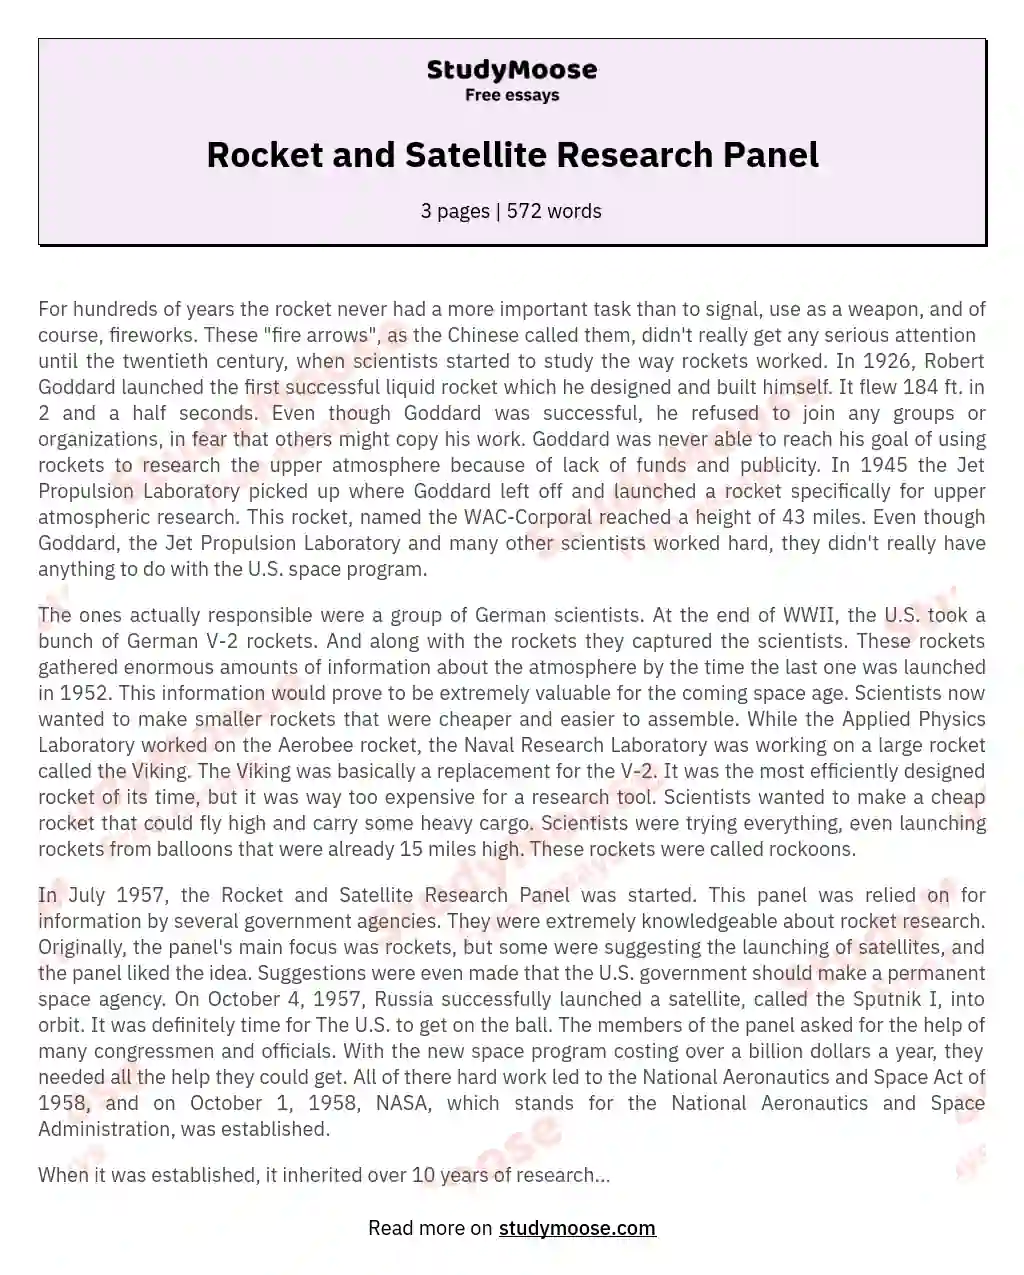 Rocket and Satellite Research Panel